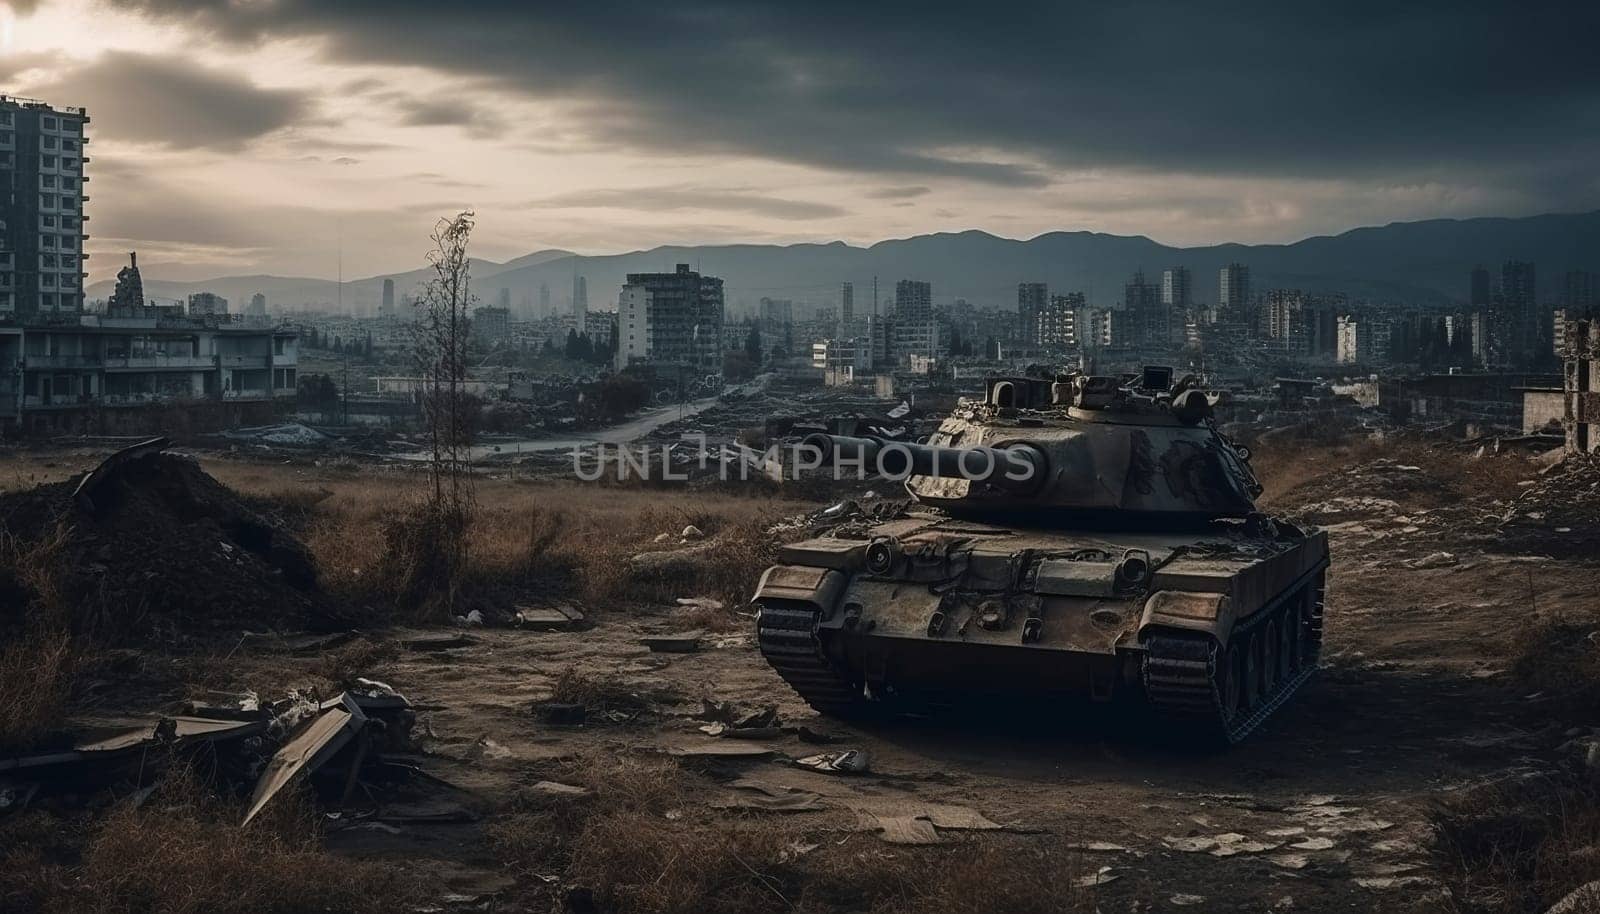 A military tank against the background of a ruined city by studiodav